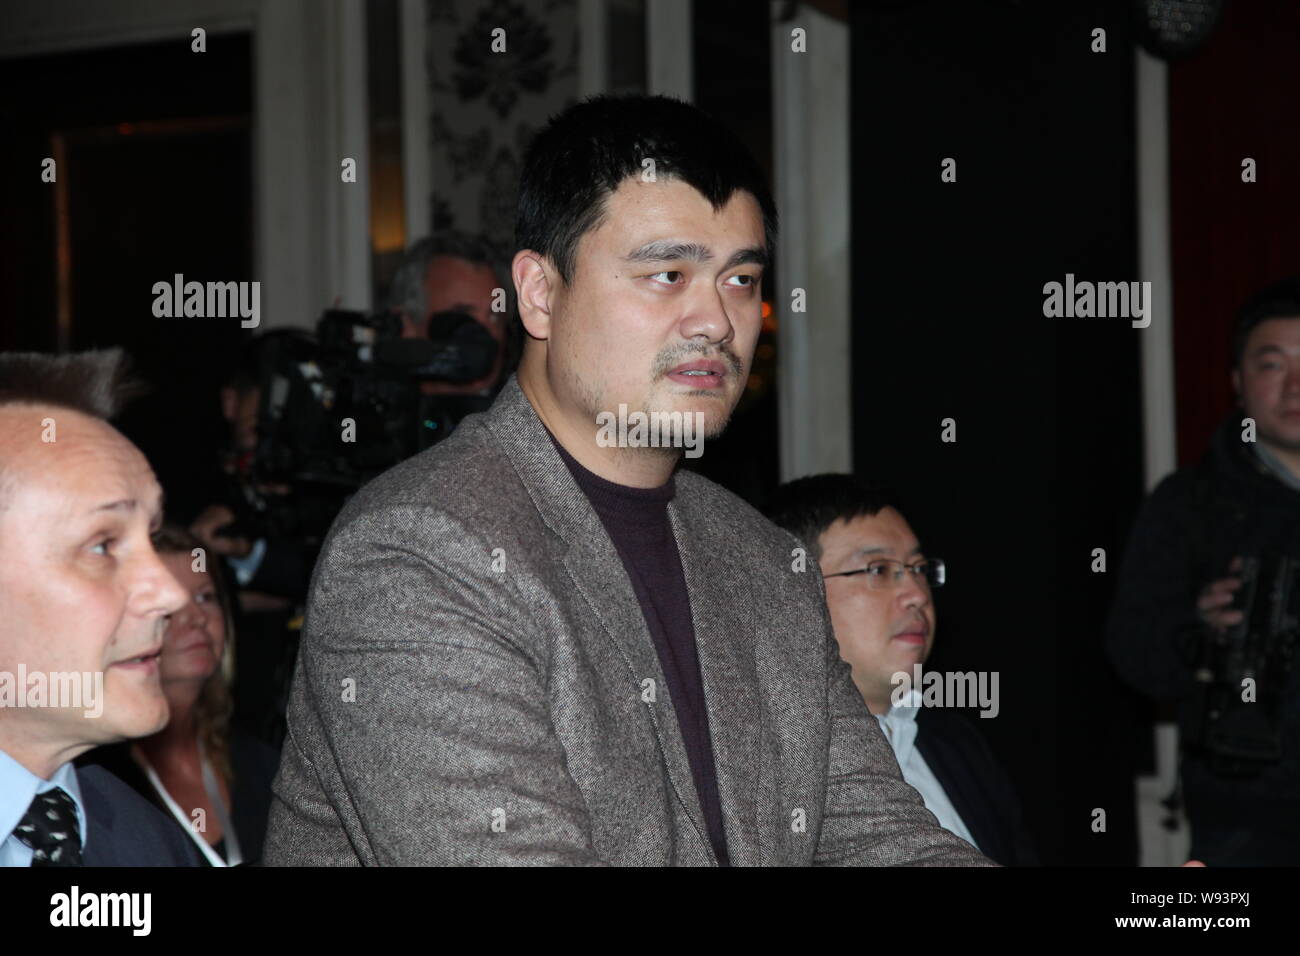 Former NBA basketball player Yao Ming, center, is pictured during a press conference for the global release of a noncommercial film aiming to protect Stock Photo